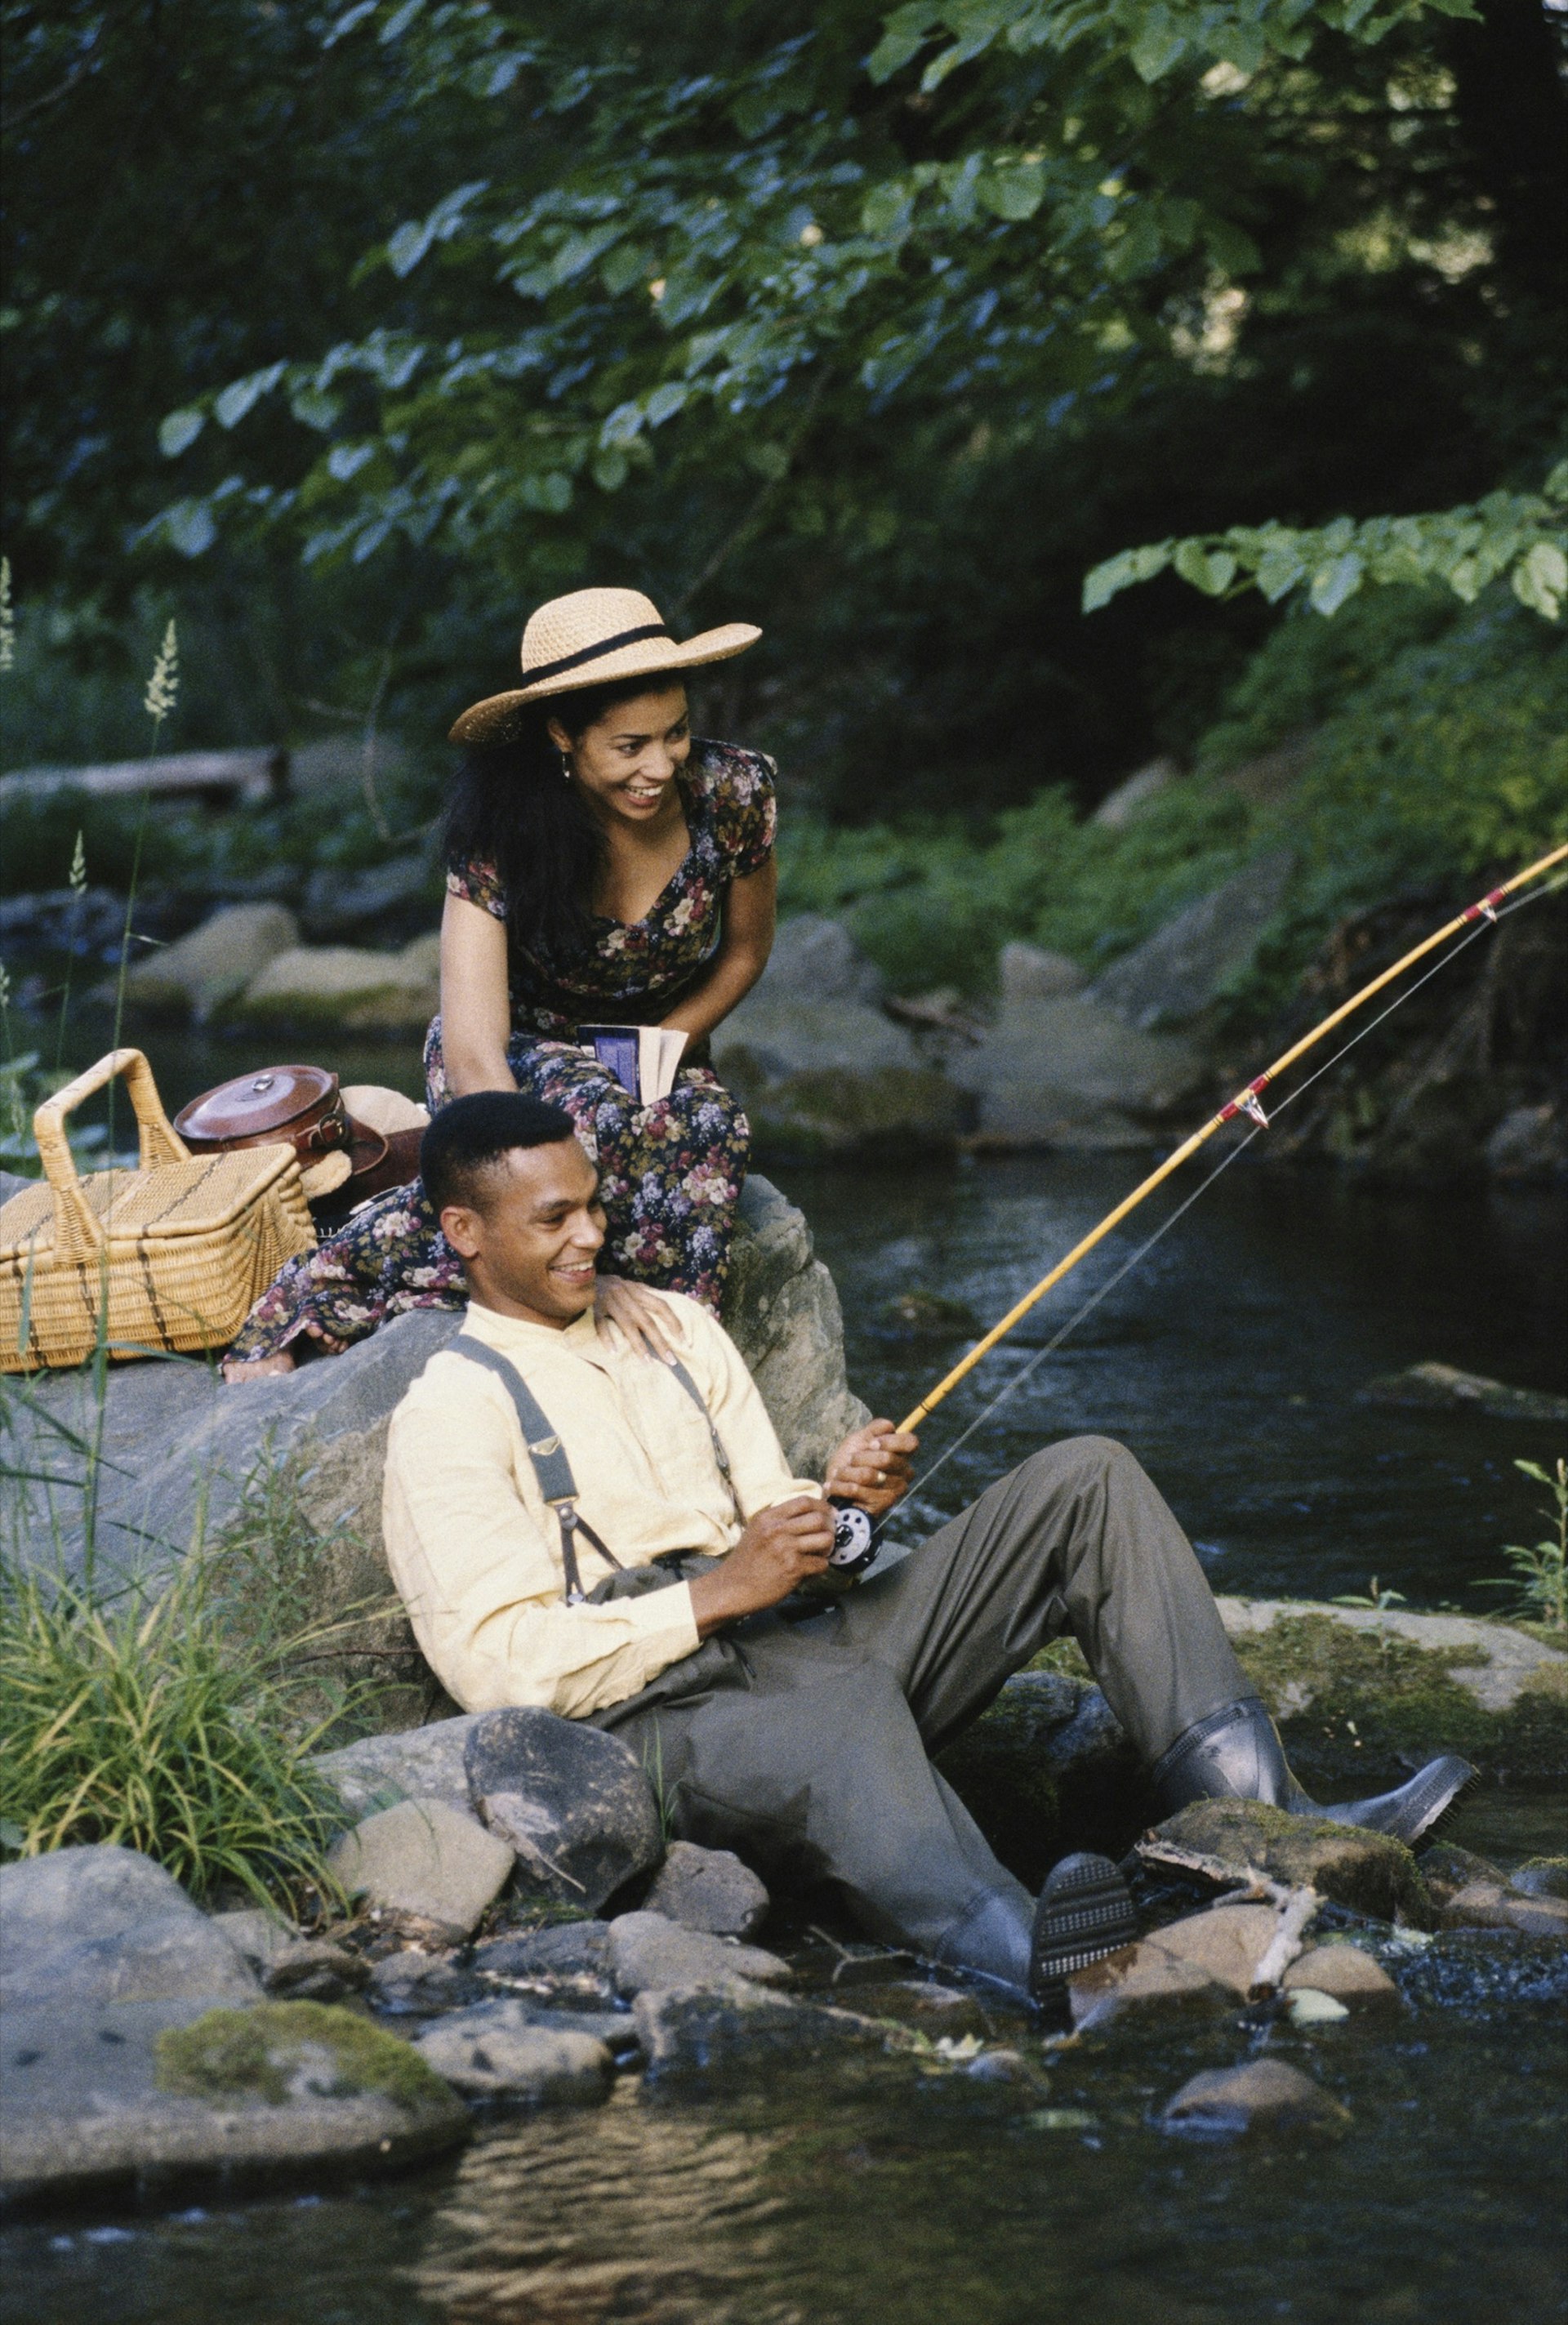 A man holds a fishing pole while a woman touches his shoulder and watches. There's a wicker picnic basket resting on the rocks.  